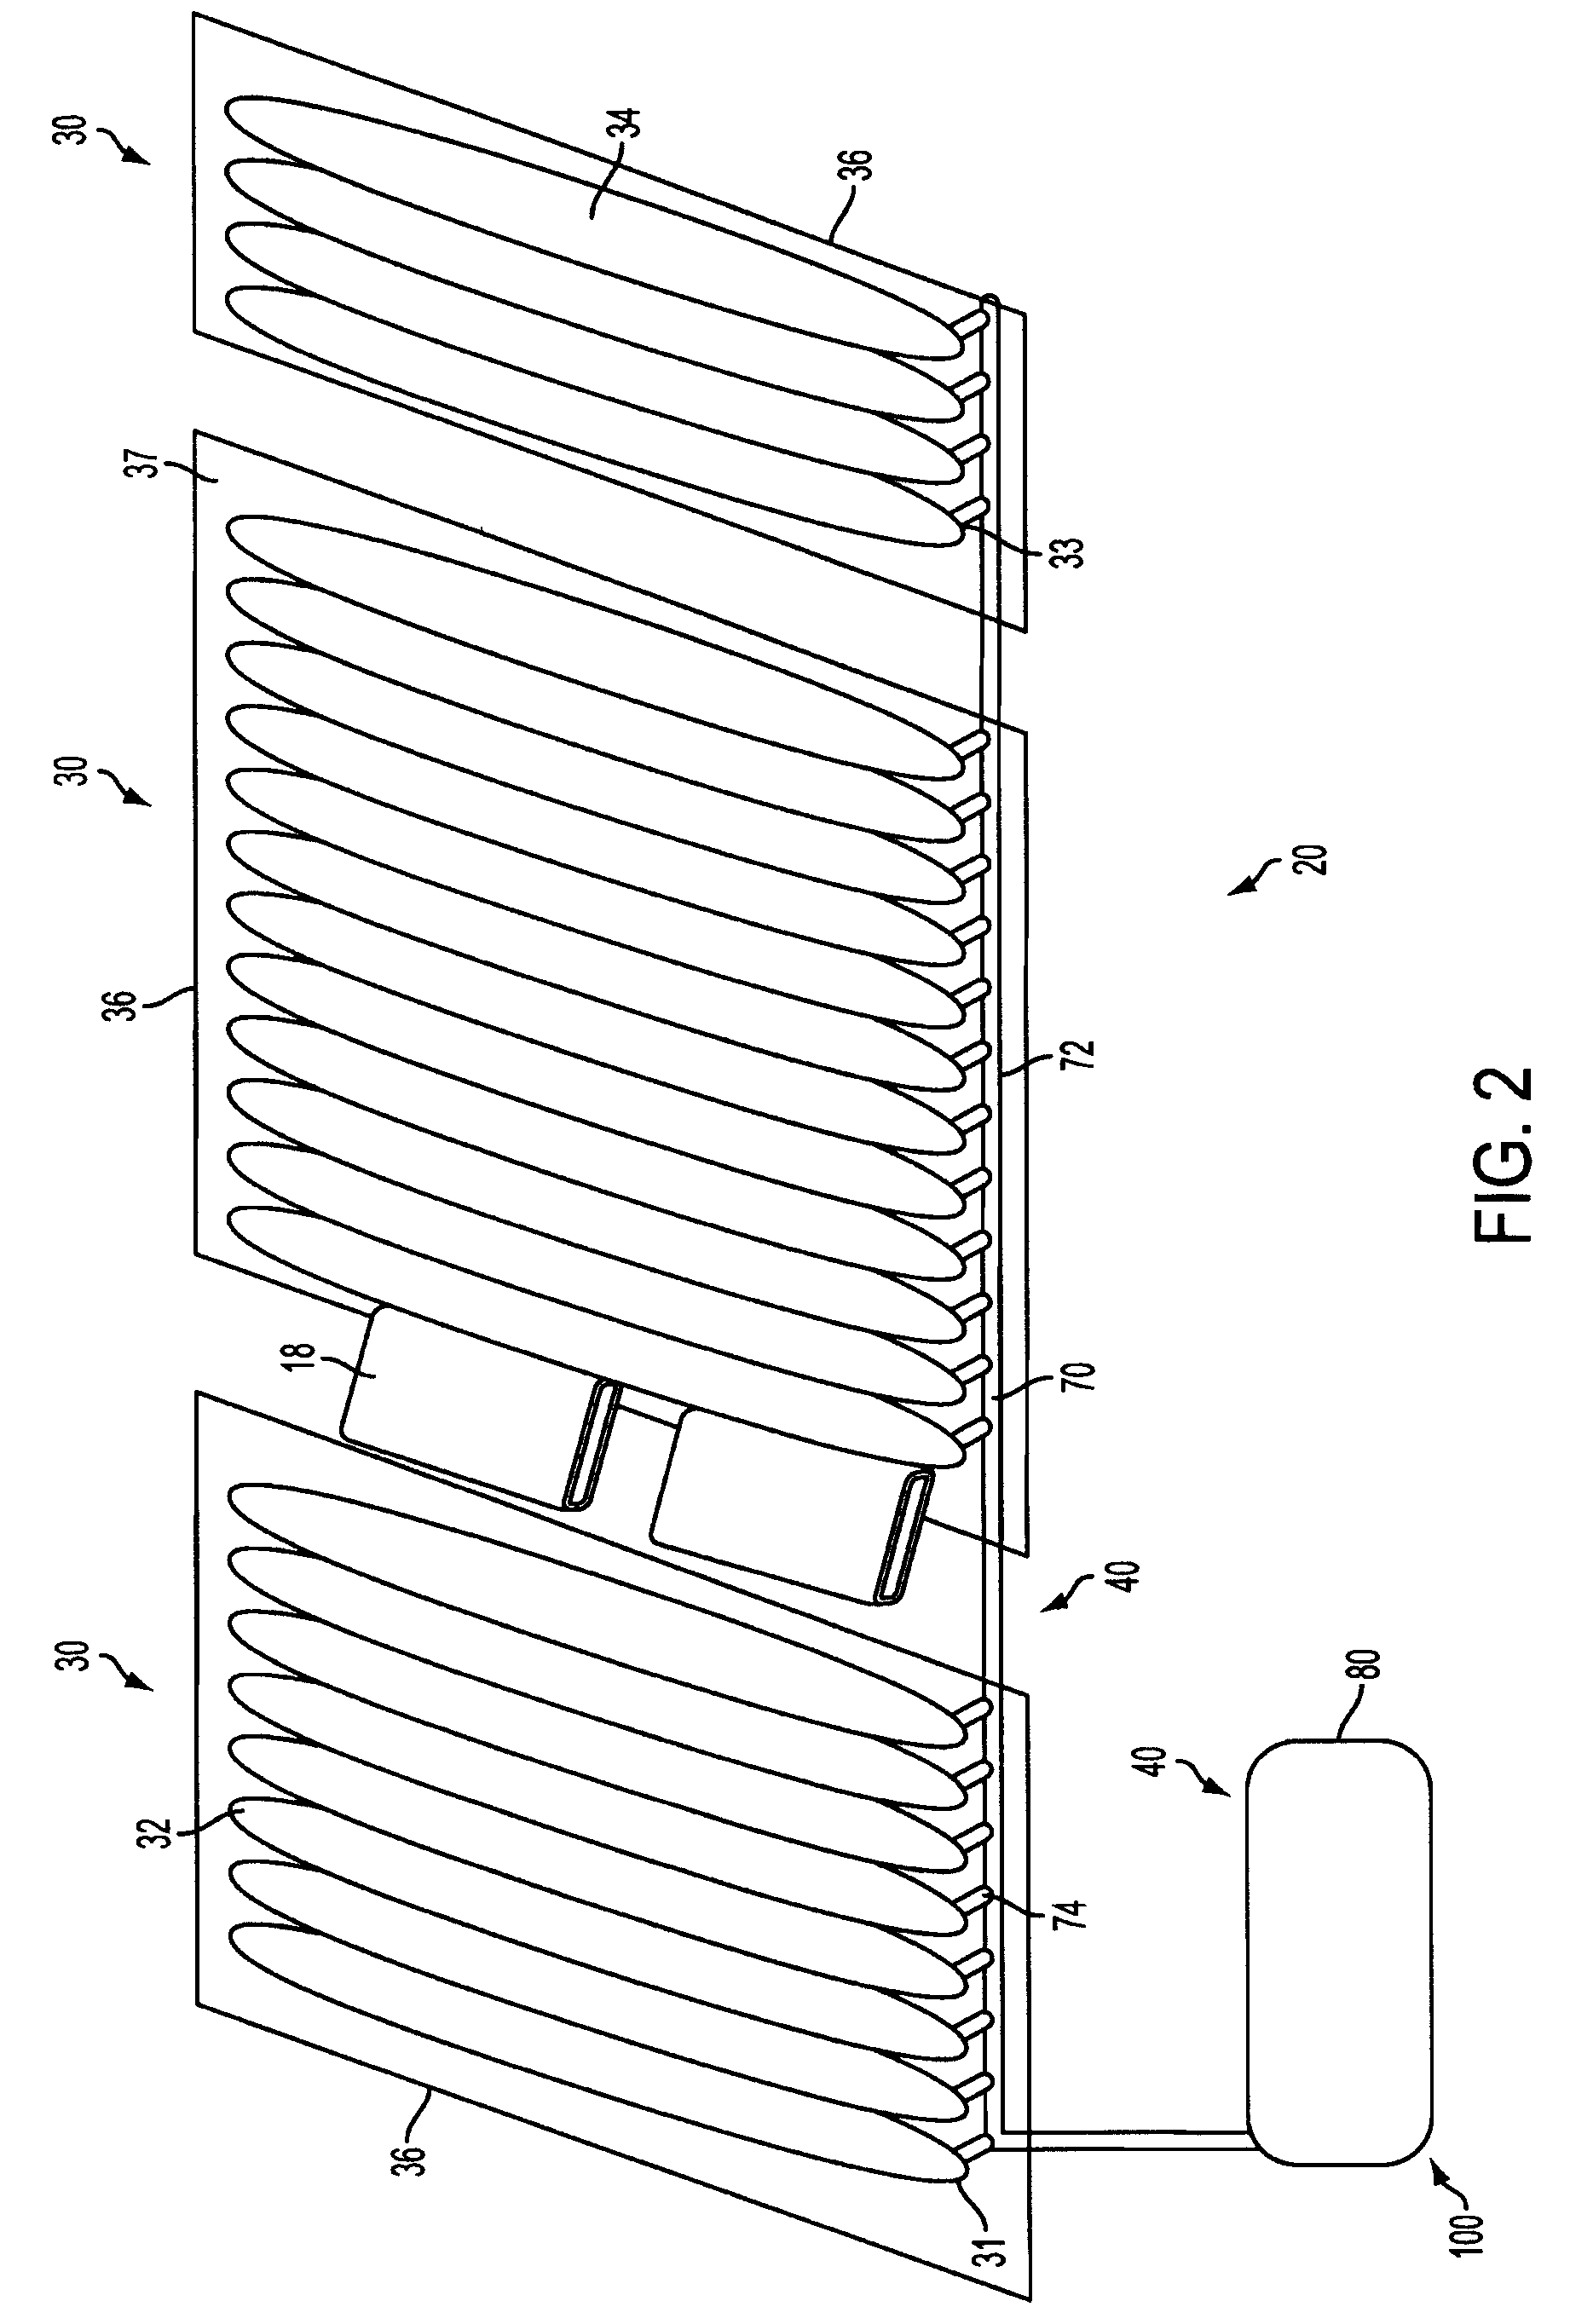 Patient support system and method